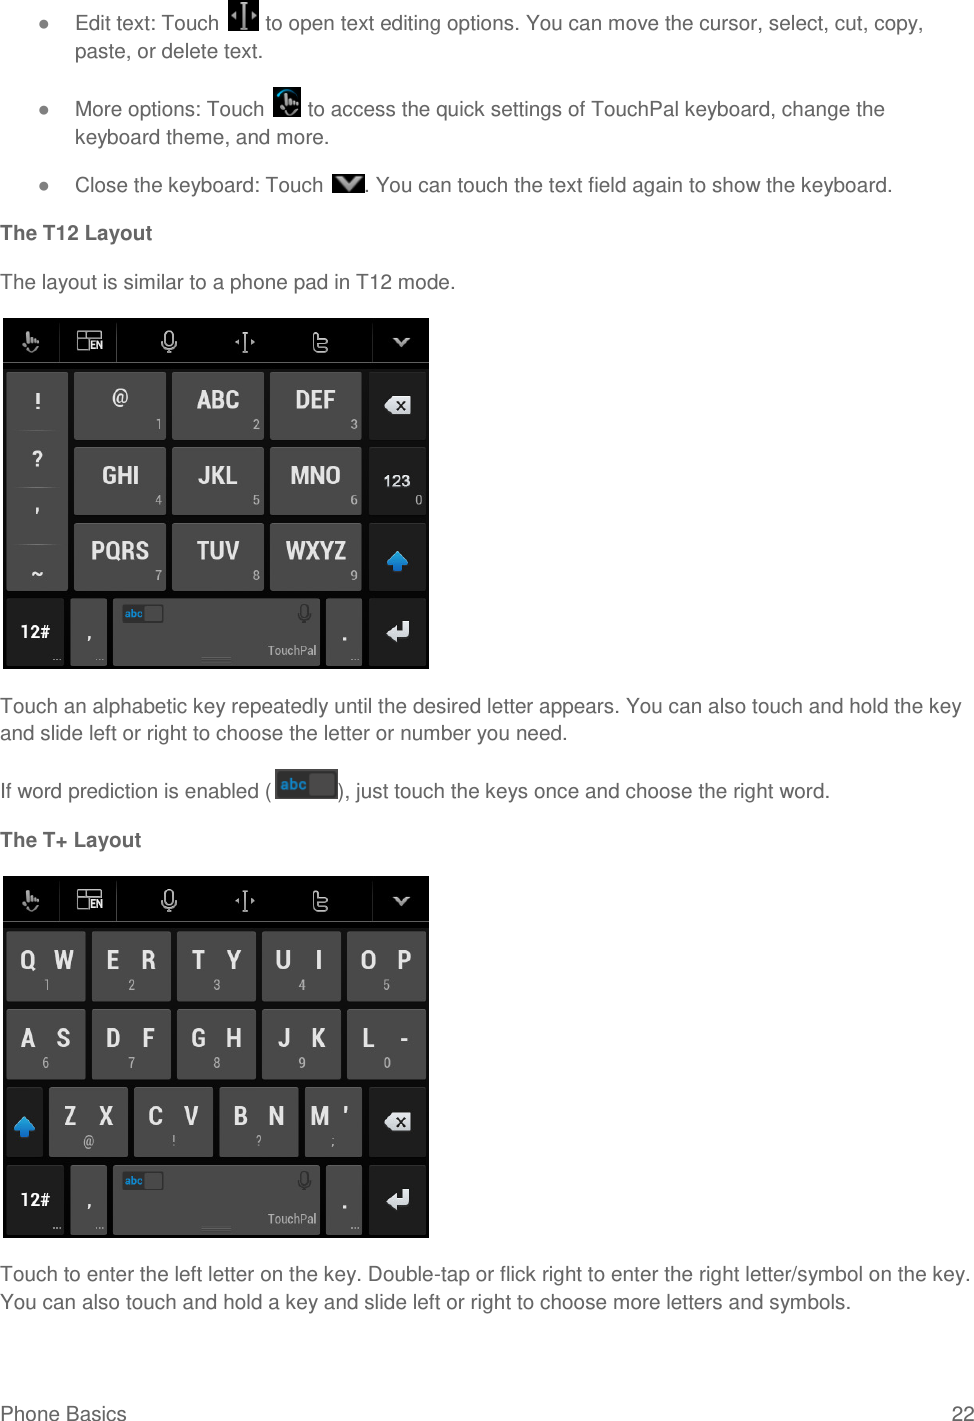 Phone Basics  22 ● Edit text: Touch   to open text editing options. You can move the cursor, select, cut, copy, paste, or delete text. ● More options: Touch   to access the quick settings of TouchPal keyboard, change the keyboard theme, and more. ● Close the keyboard: Touch  . You can touch the text field again to show the keyboard. The T12 Layout The layout is similar to a phone pad in T12 mode.  Touch an alphabetic key repeatedly until the desired letter appears. You can also touch and hold the key and slide left or right to choose the letter or number you need. If word prediction is enabled ( ), just touch the keys once and choose the right word. The T+ Layout  Touch to enter the left letter on the key. Double-tap or flick right to enter the right letter/symbol on the key. You can also touch and hold a key and slide left or right to choose more letters and symbols. 